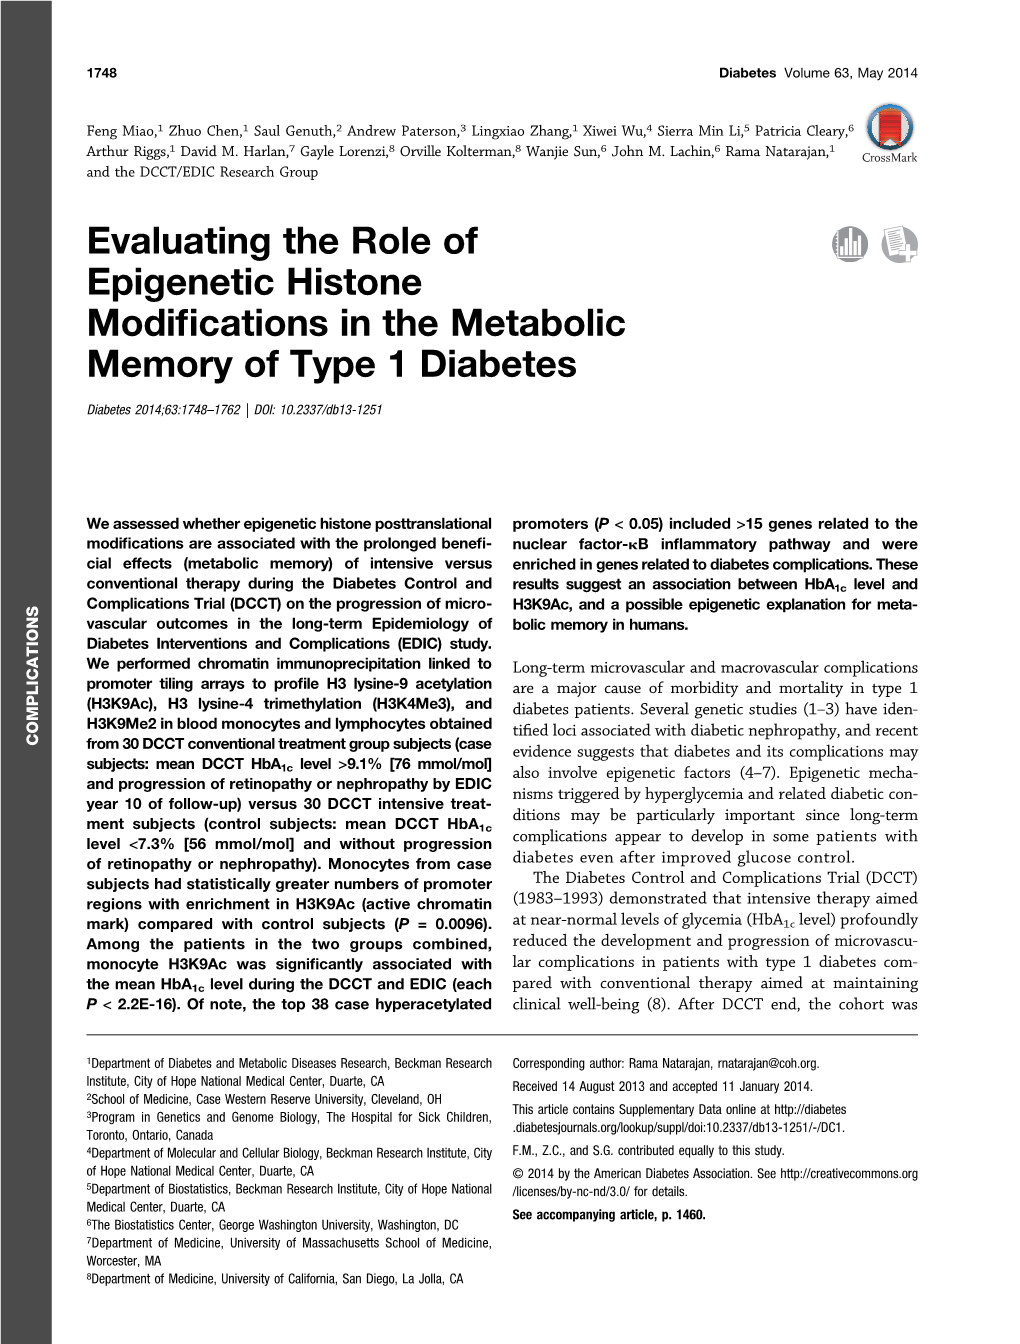 Evaluating the Role of Epigenetic Histone Modifications in the Metabolic Memory of Type 1 Diabetes